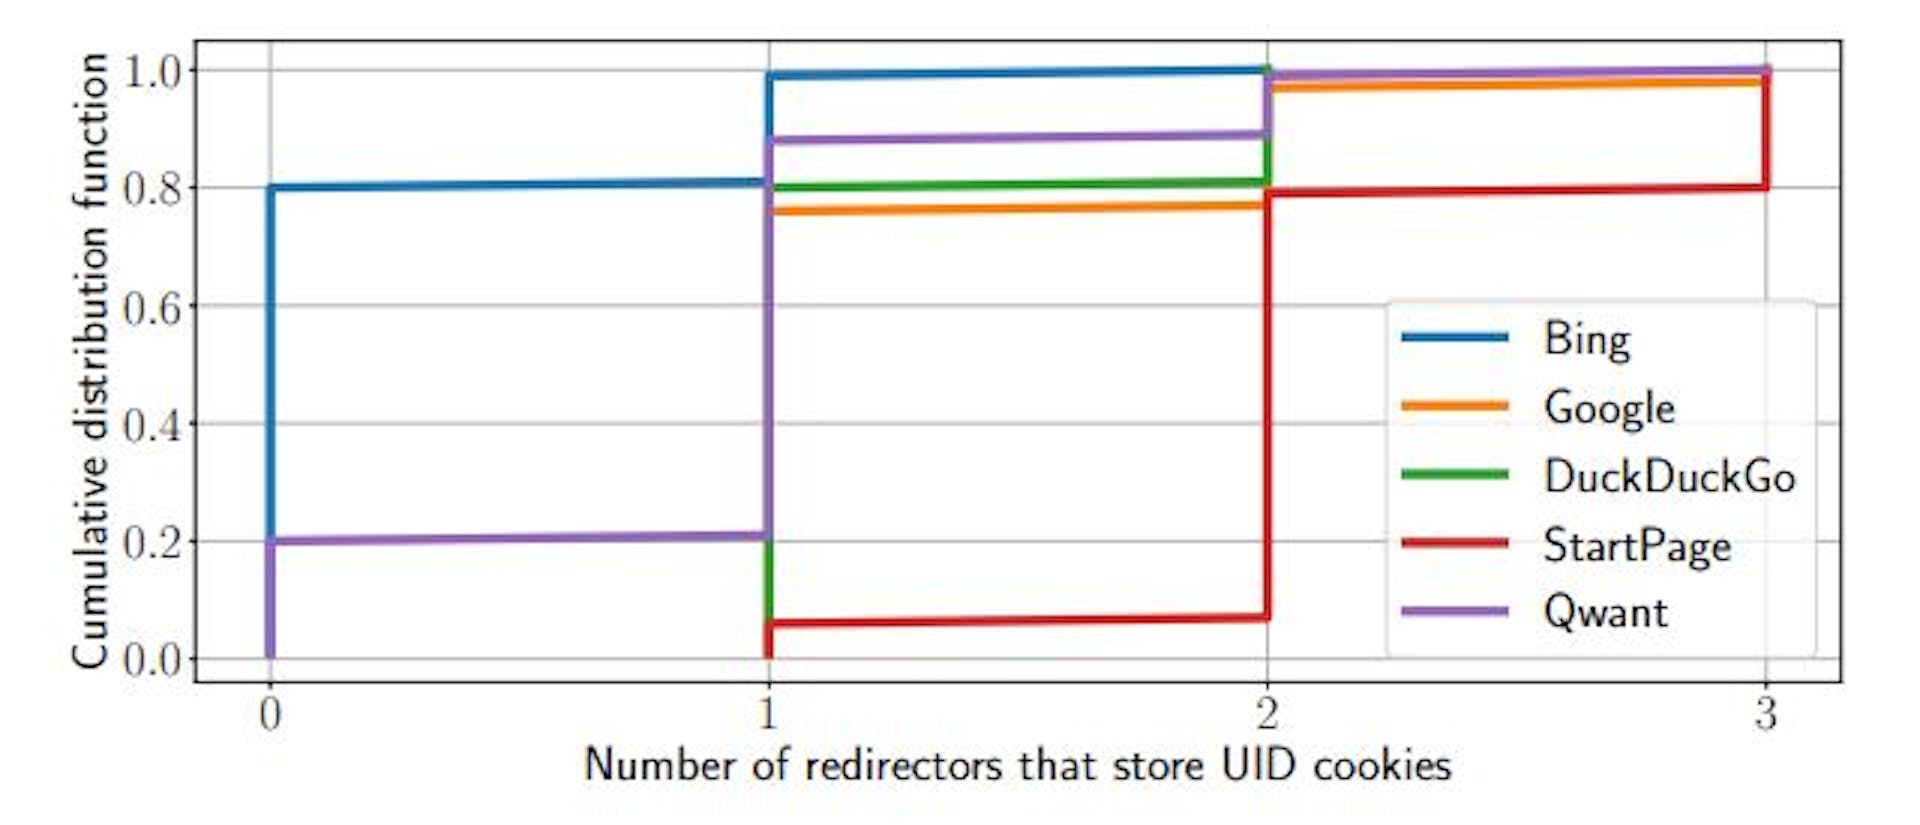 Figure 5: CDF of the number of different redirectors that store UID cookies for Bing, DuckDuckGo, Google, and StartPage.